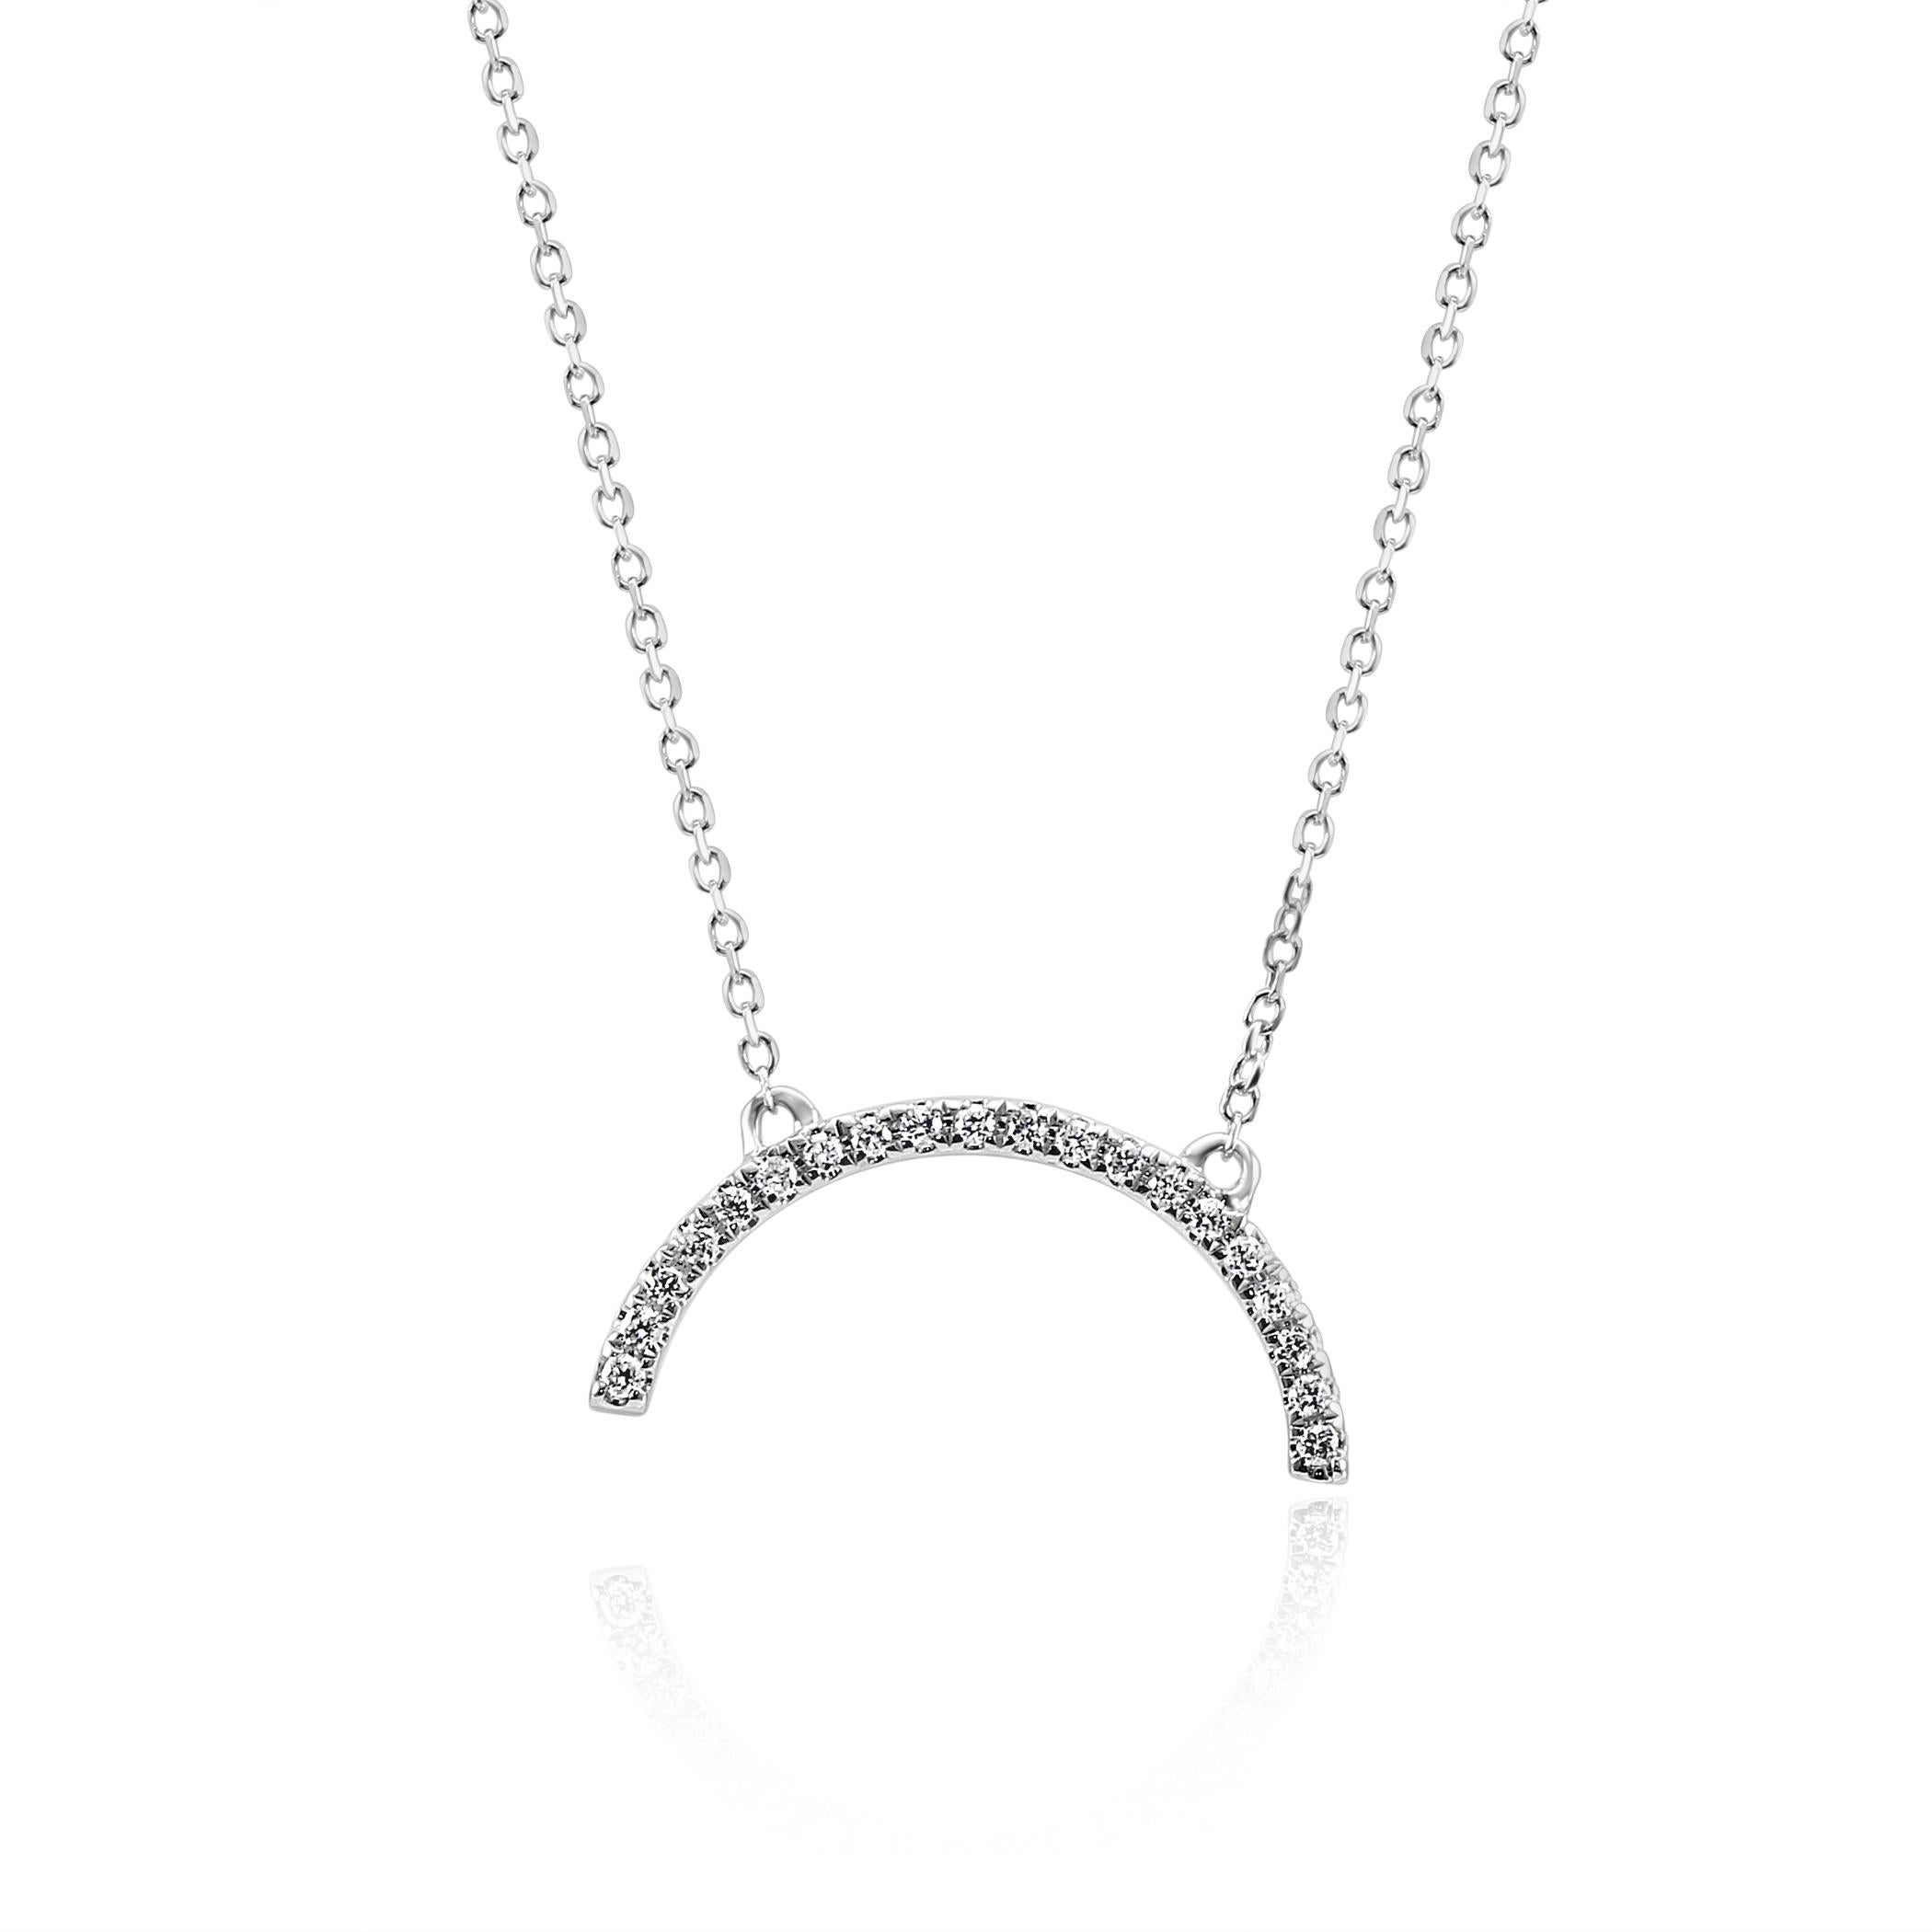 20 White G-H Color SI Diamond Round 0.10 Carat set in Stylish Fashion Drop Pendant Chain Necklace in 14K White Gold. With 14K white Gold Chain.

Style available in different price ranges and gold colors. Prices are based on your selection of 4C's